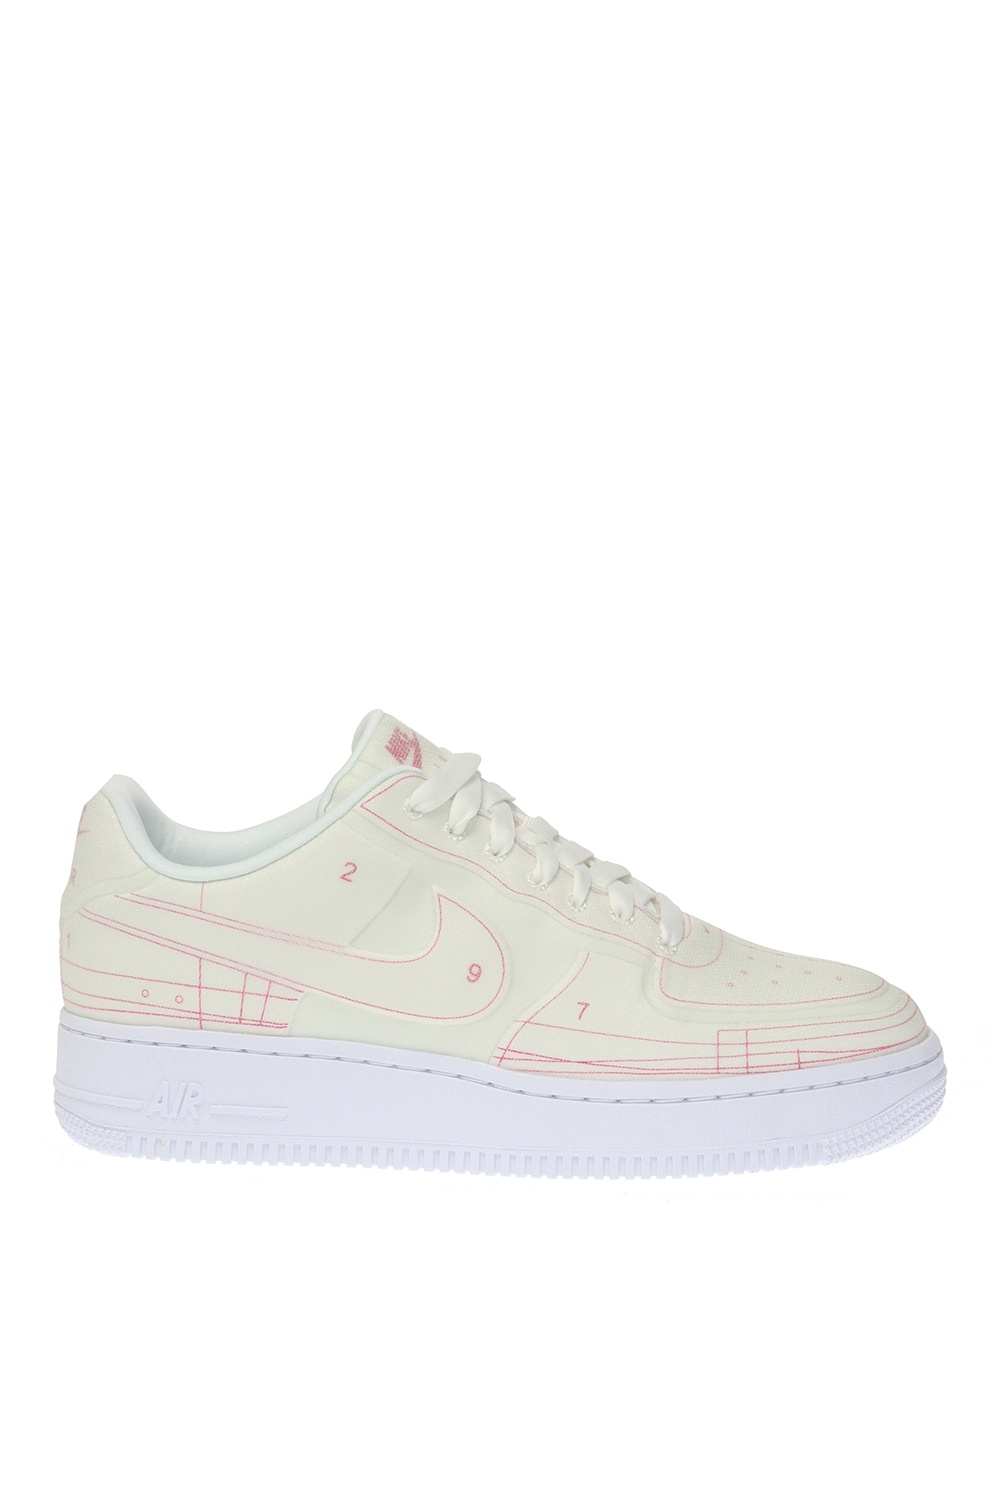 nike air force 1 07 trainers summit white university red lx f